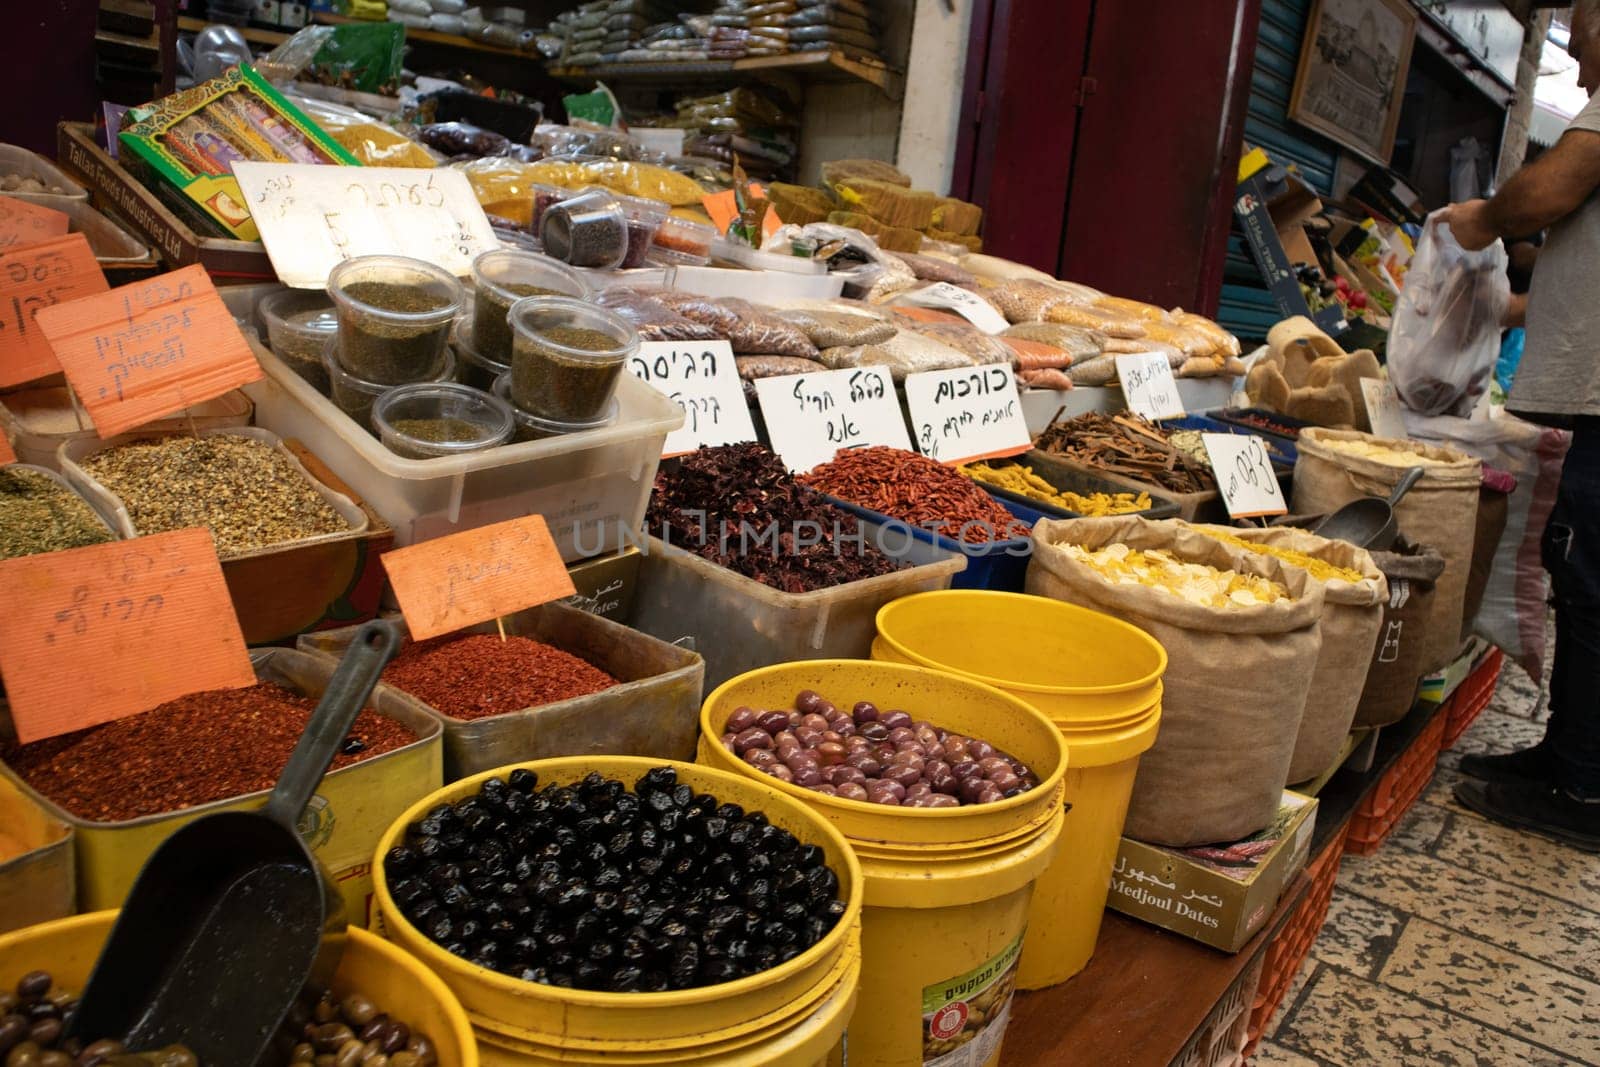 Goods at a bazaar in the Israeli city of Acre by gordiza